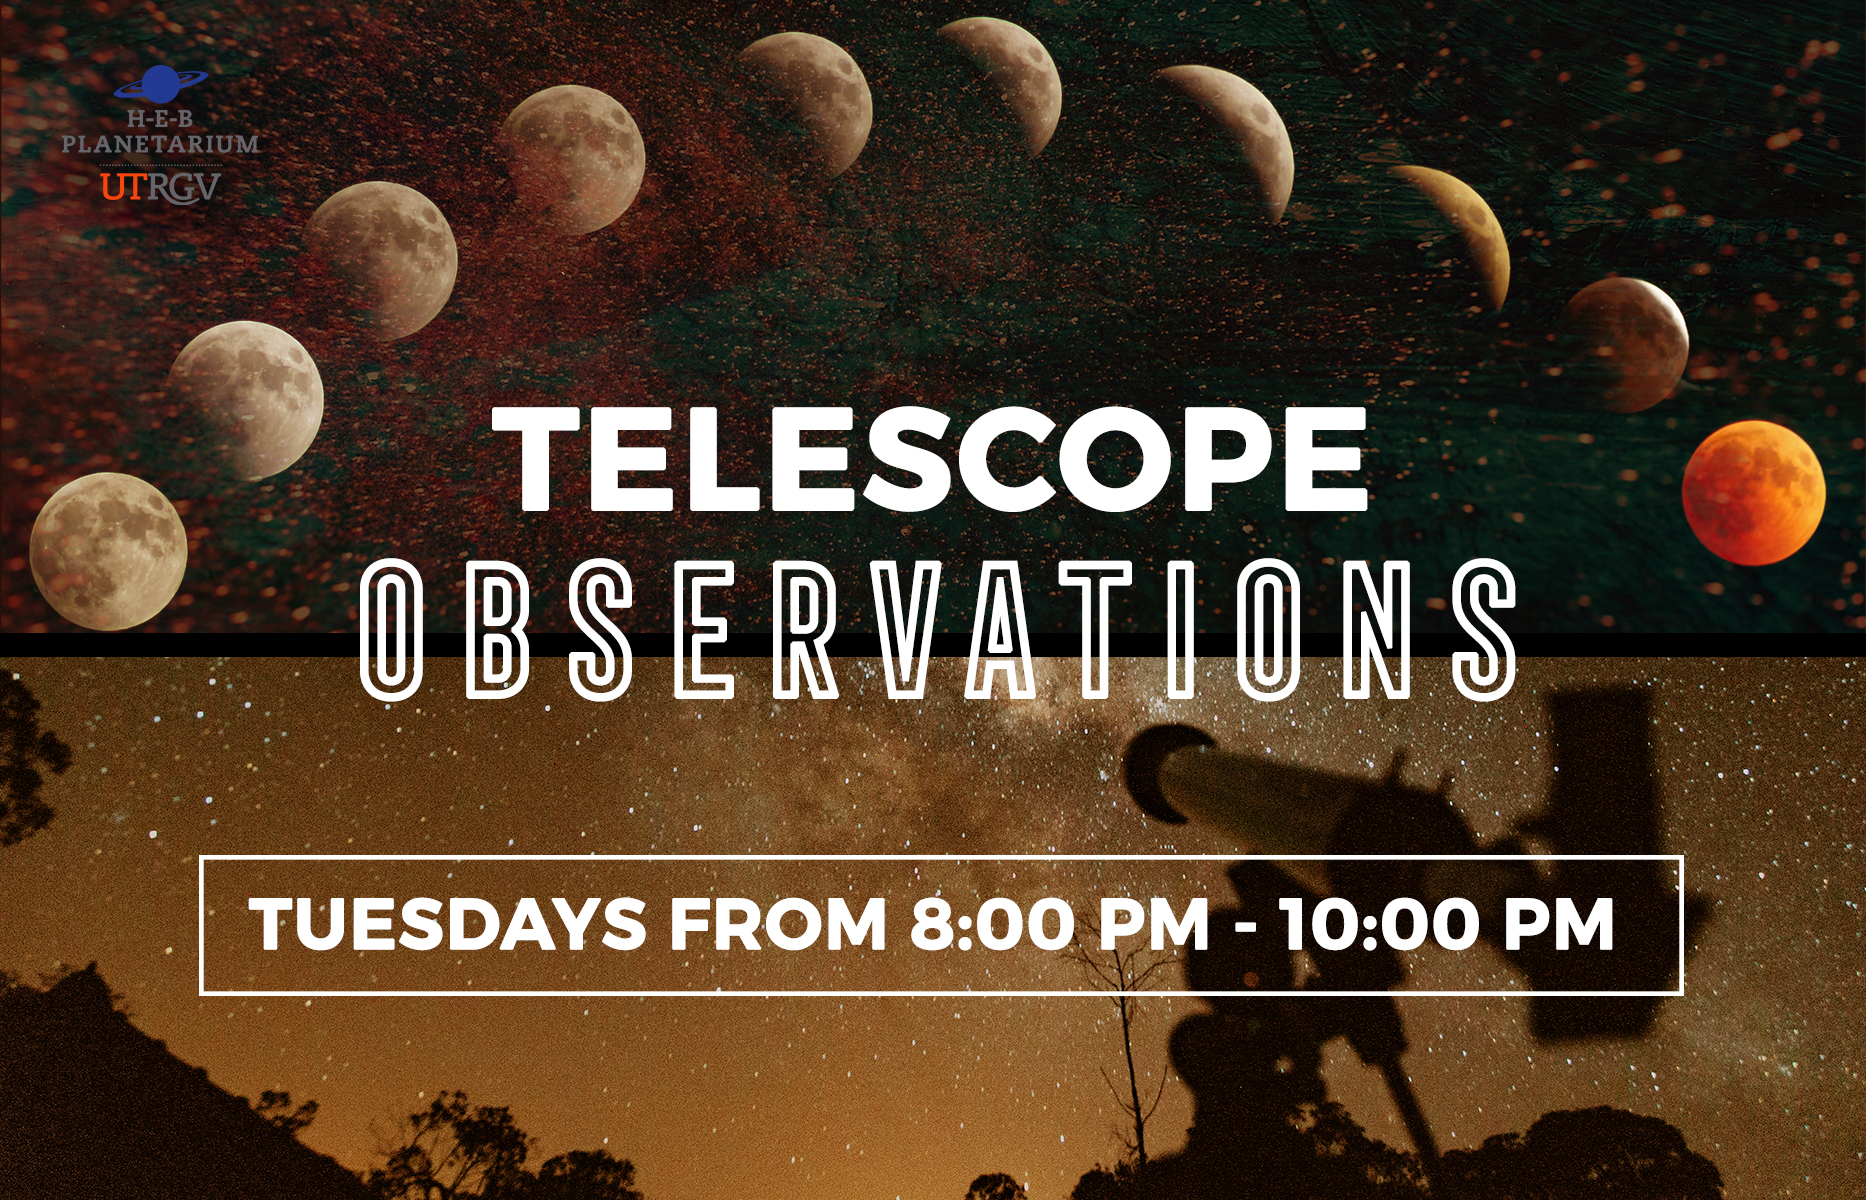 UTRGV Planetarium:  Experience Monday - Friday 8am - 5pm, Engage Tuesday Observations until 10pm, Discover